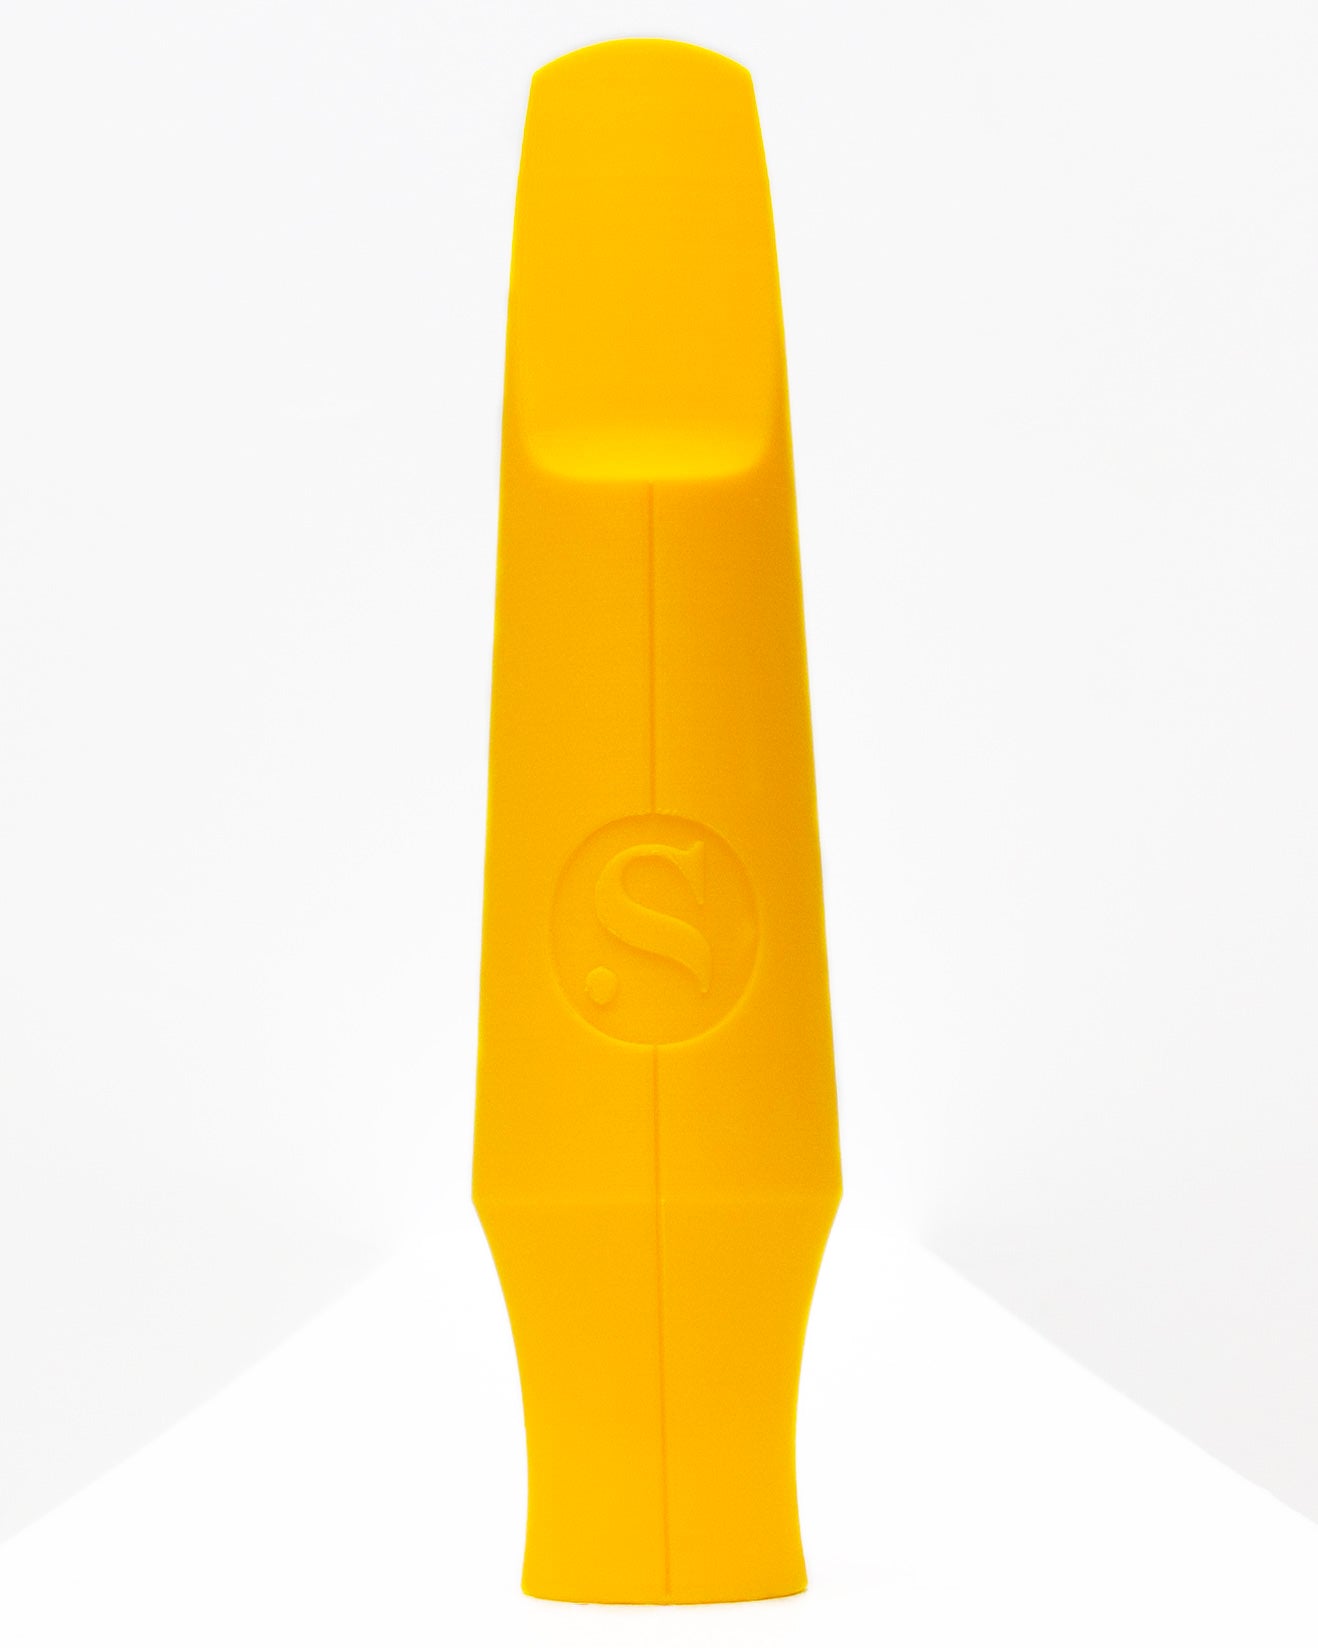 Baritone Signature Saxophone mouthpiece - Daro Behroozi by Syos - 9 / Mellow Yellow